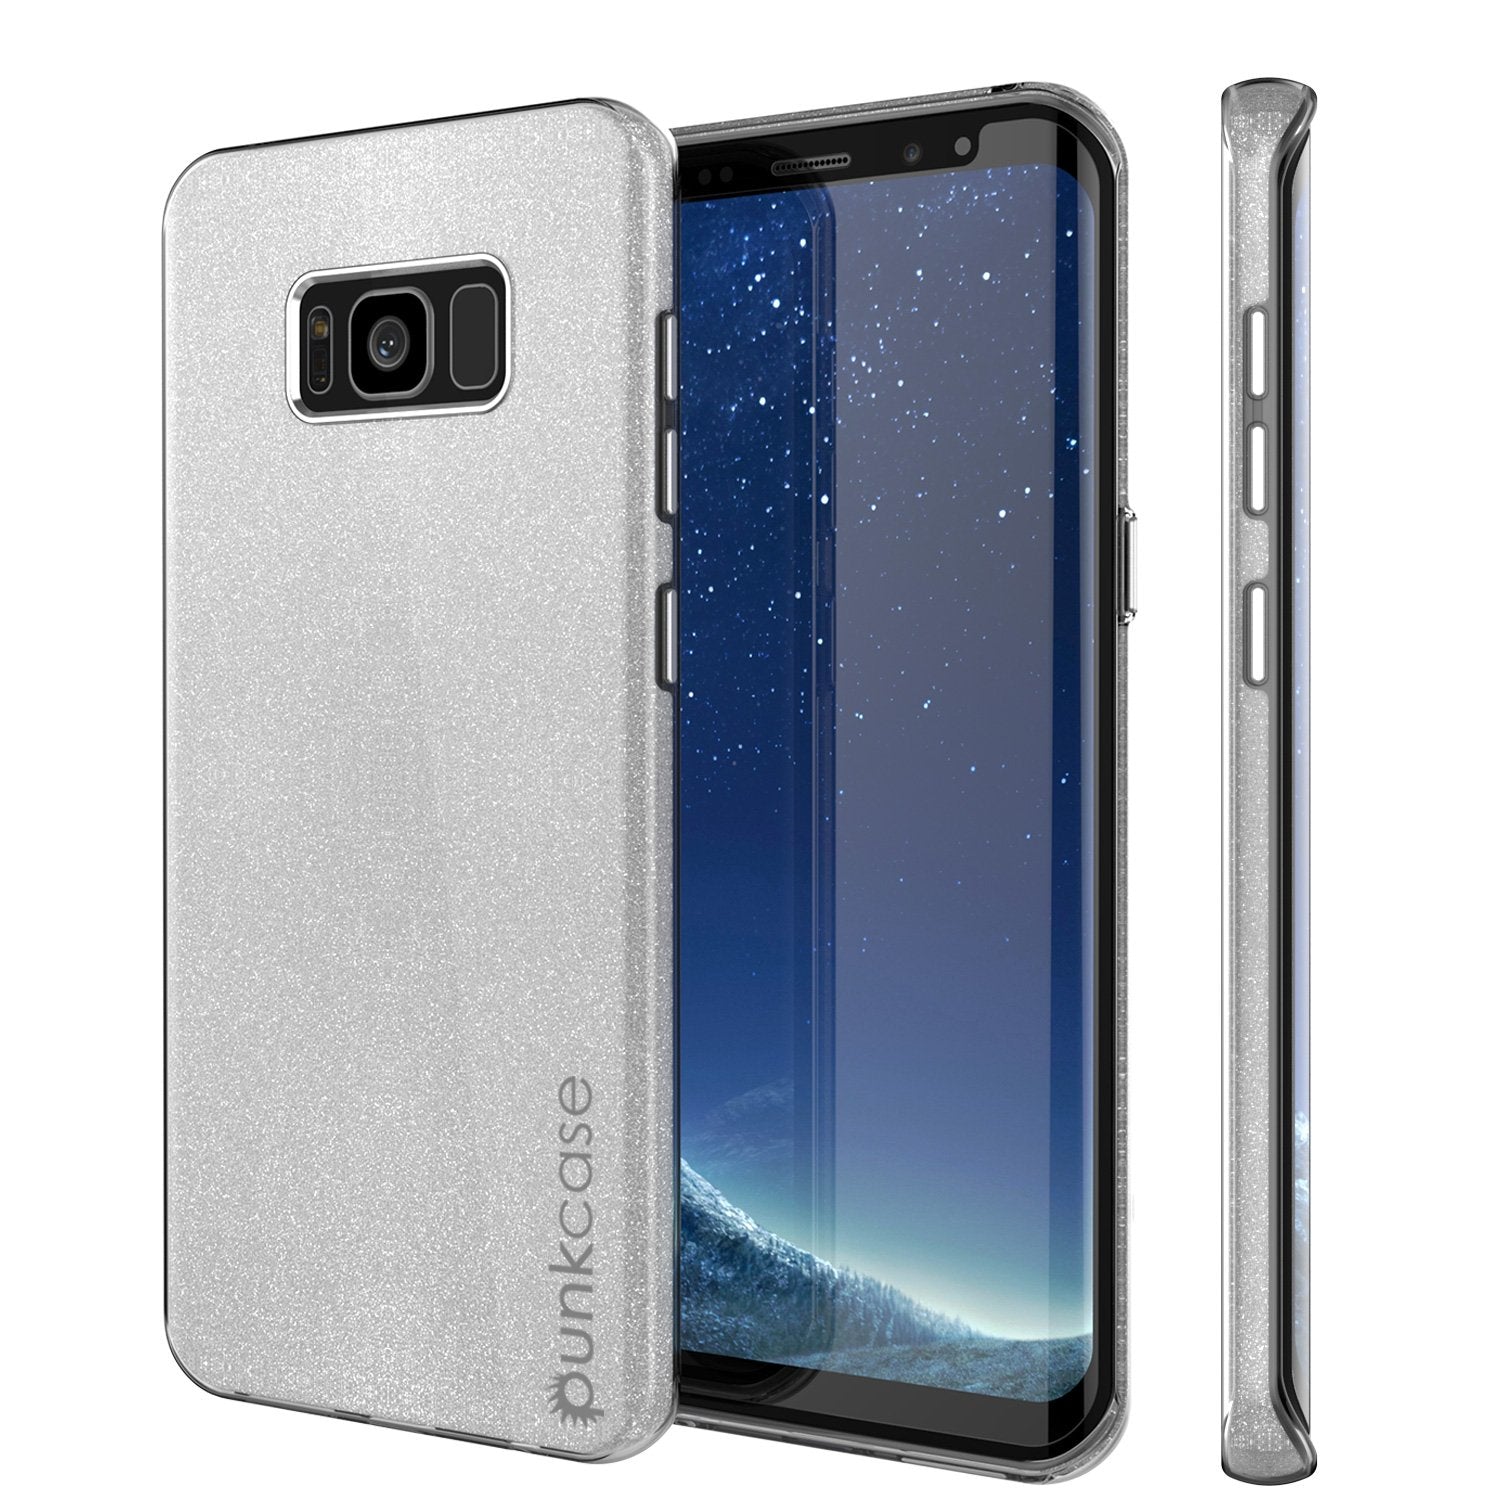 Galaxy S8 Case, Punkcase Galactic 2.0 Series Ultra Slim Protective Armor TPU Cover w/ PunkShield Screen Protector | Lifetime Exchange Warranty | Designed for Samsung Galaxy S8 [Silver] (Color in image: silver)